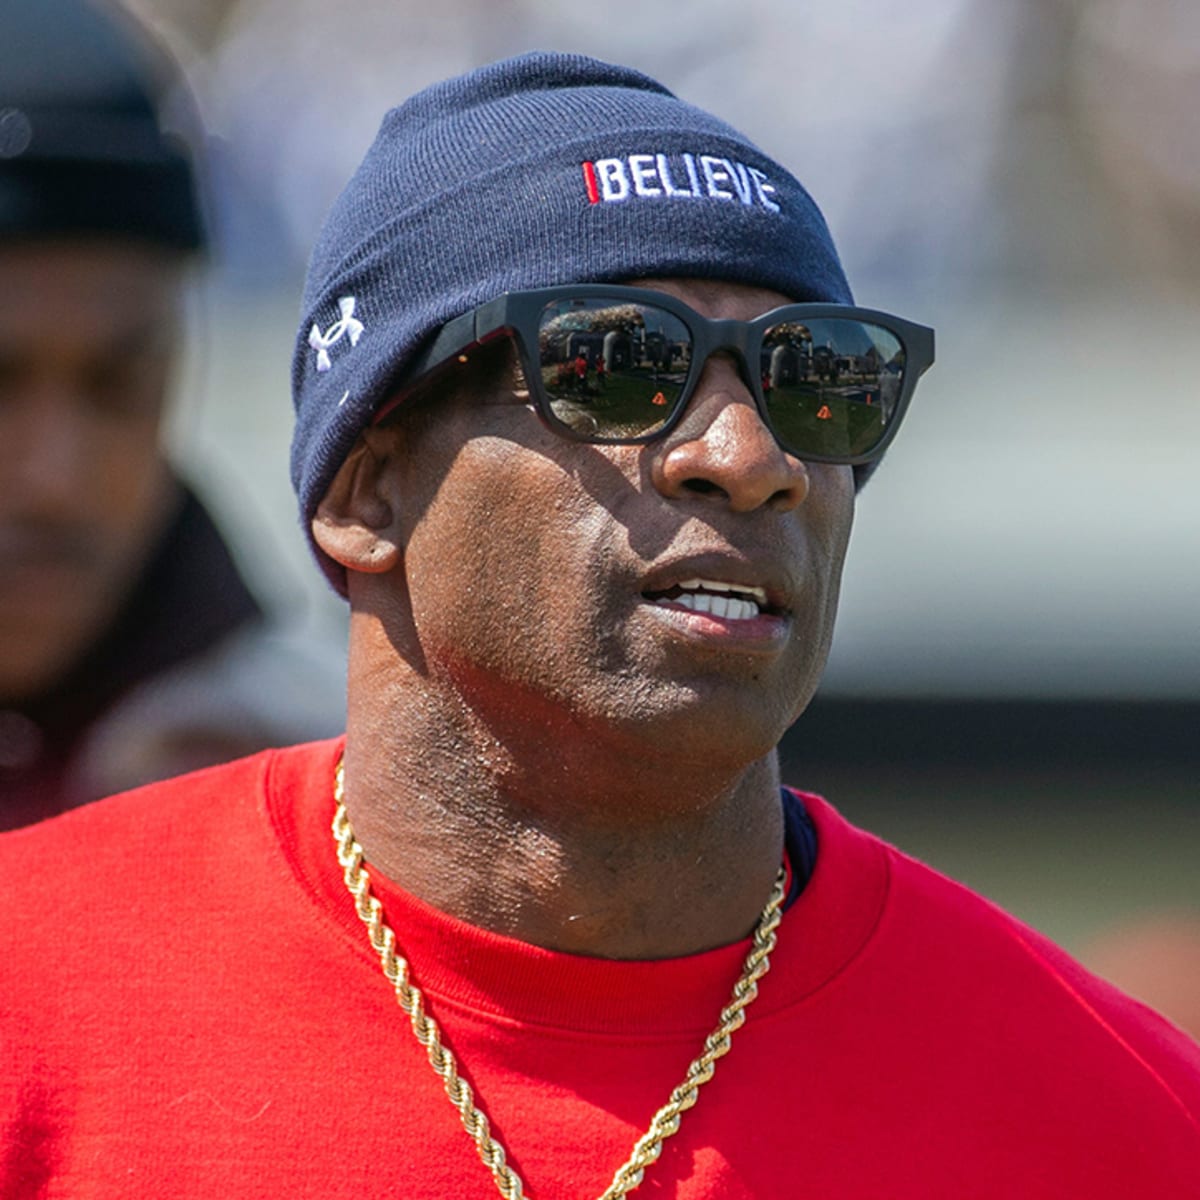 Deion Sanders reacts to no HBCU players selected in NFL draft - Sports  Illustrated